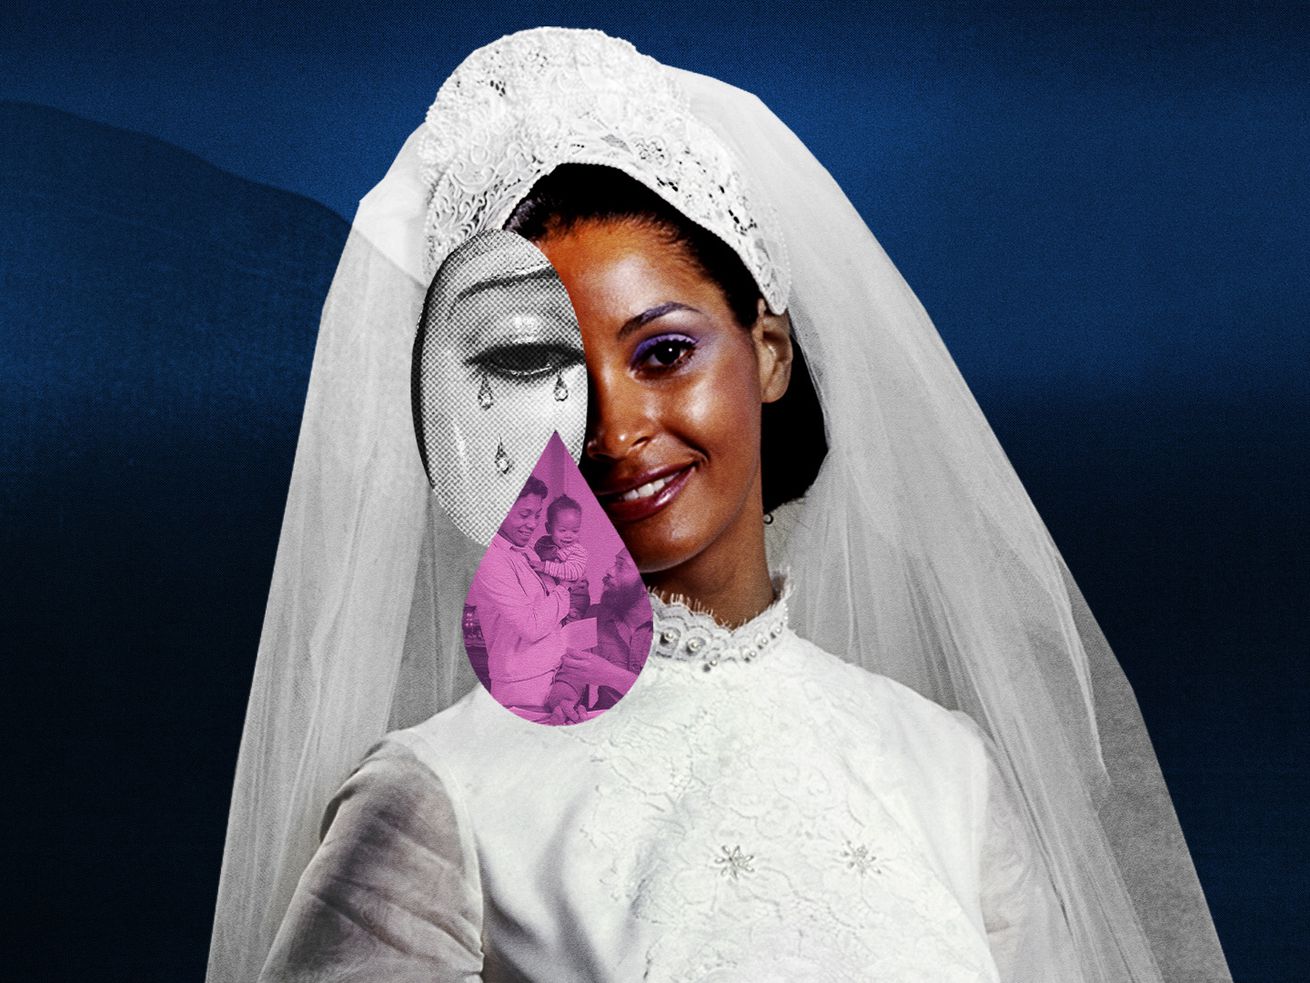 A photo of a woman wearing a 70s-era bridal gown and veil. A crying eye and a happy Black family within a lavender teardrop shape are collaged on top of the woman’s image.